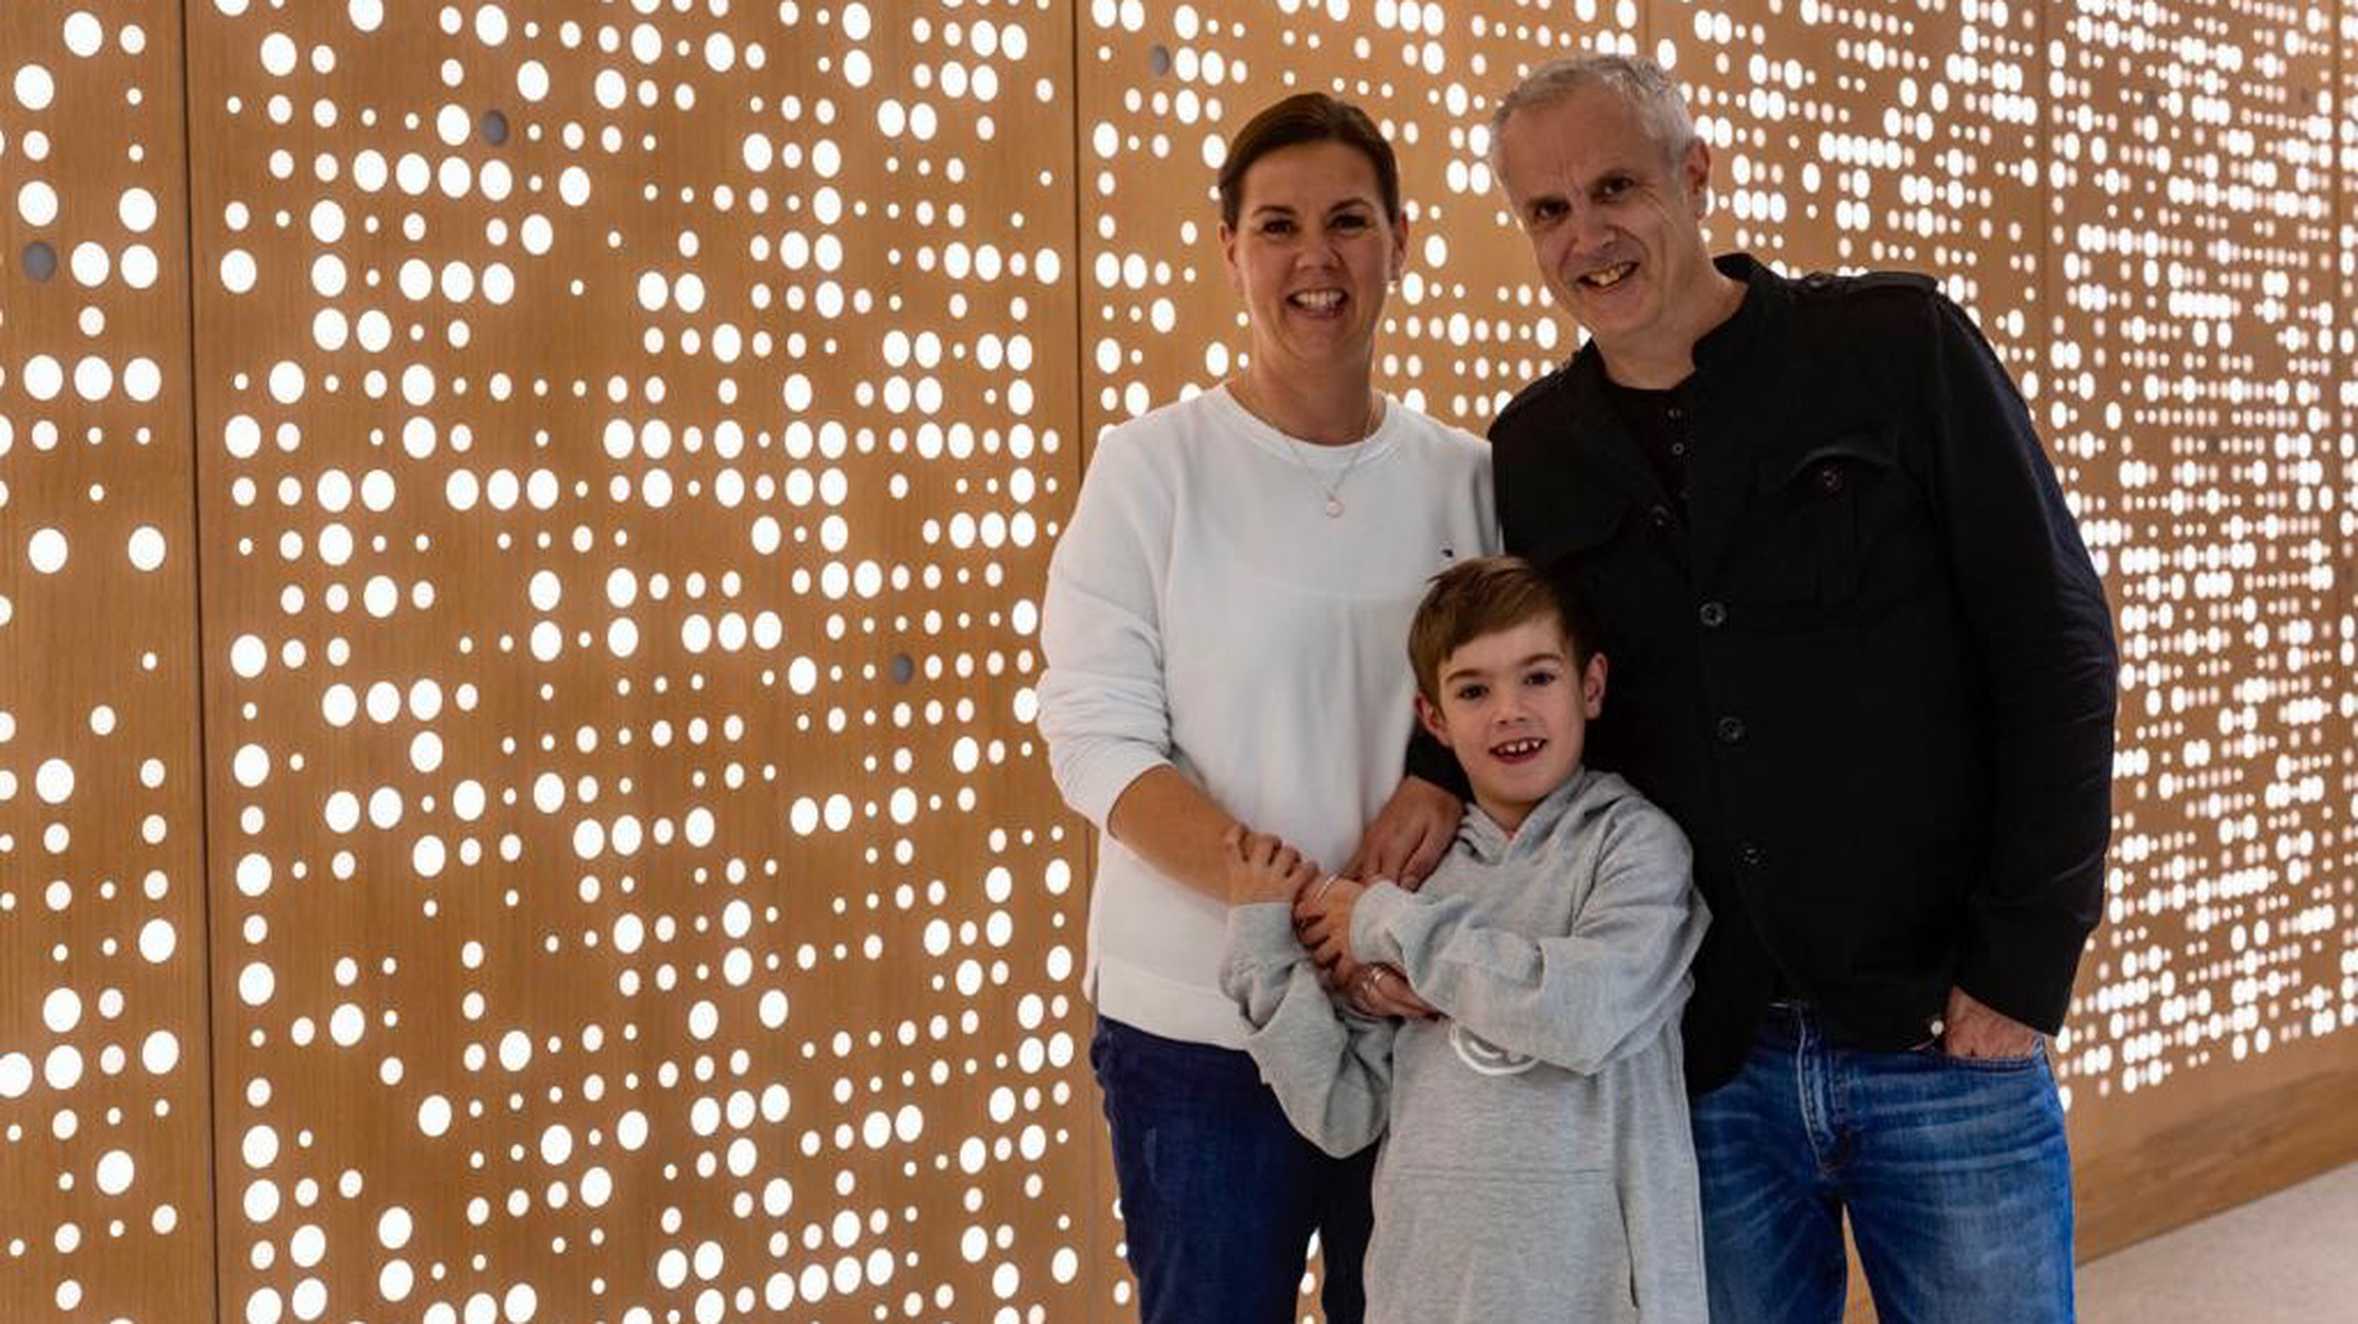 Stanley and his parents standing in front of a wall of lights.